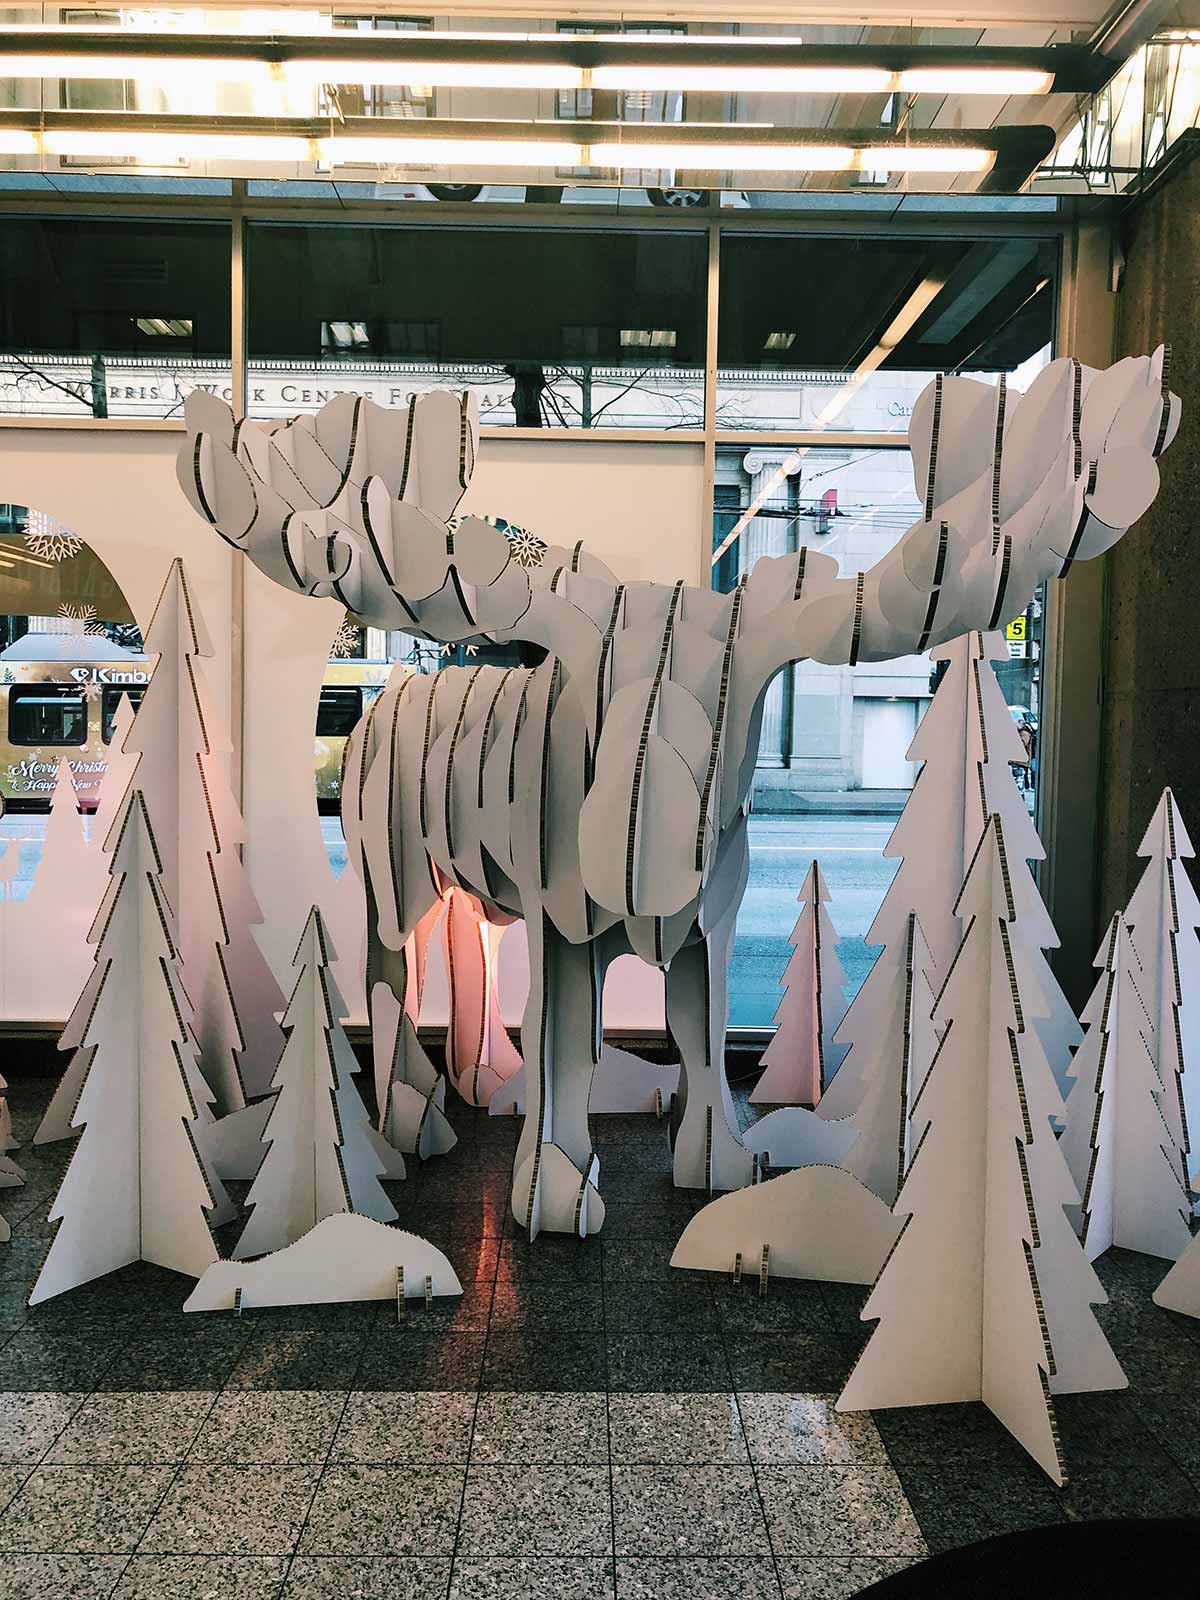 Harbour centre christmas designs for their retail display units